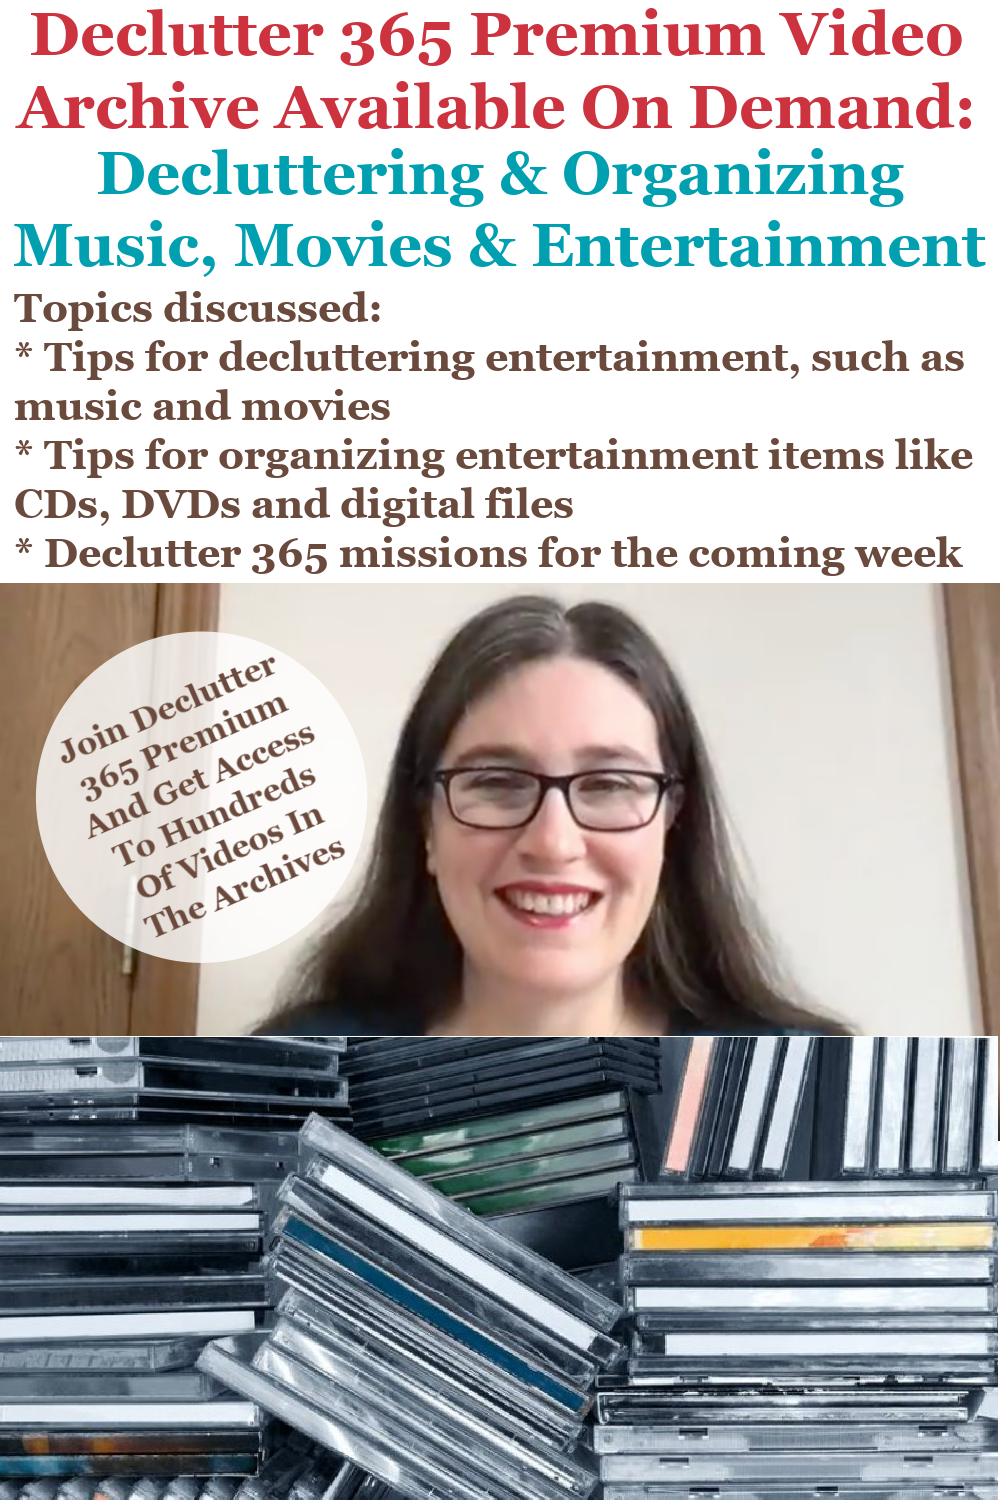 Declutter 365 Premium video archive available on demand all about decluttering and organizing entertainment, such as music and movies, on Home Storage Solutions 101